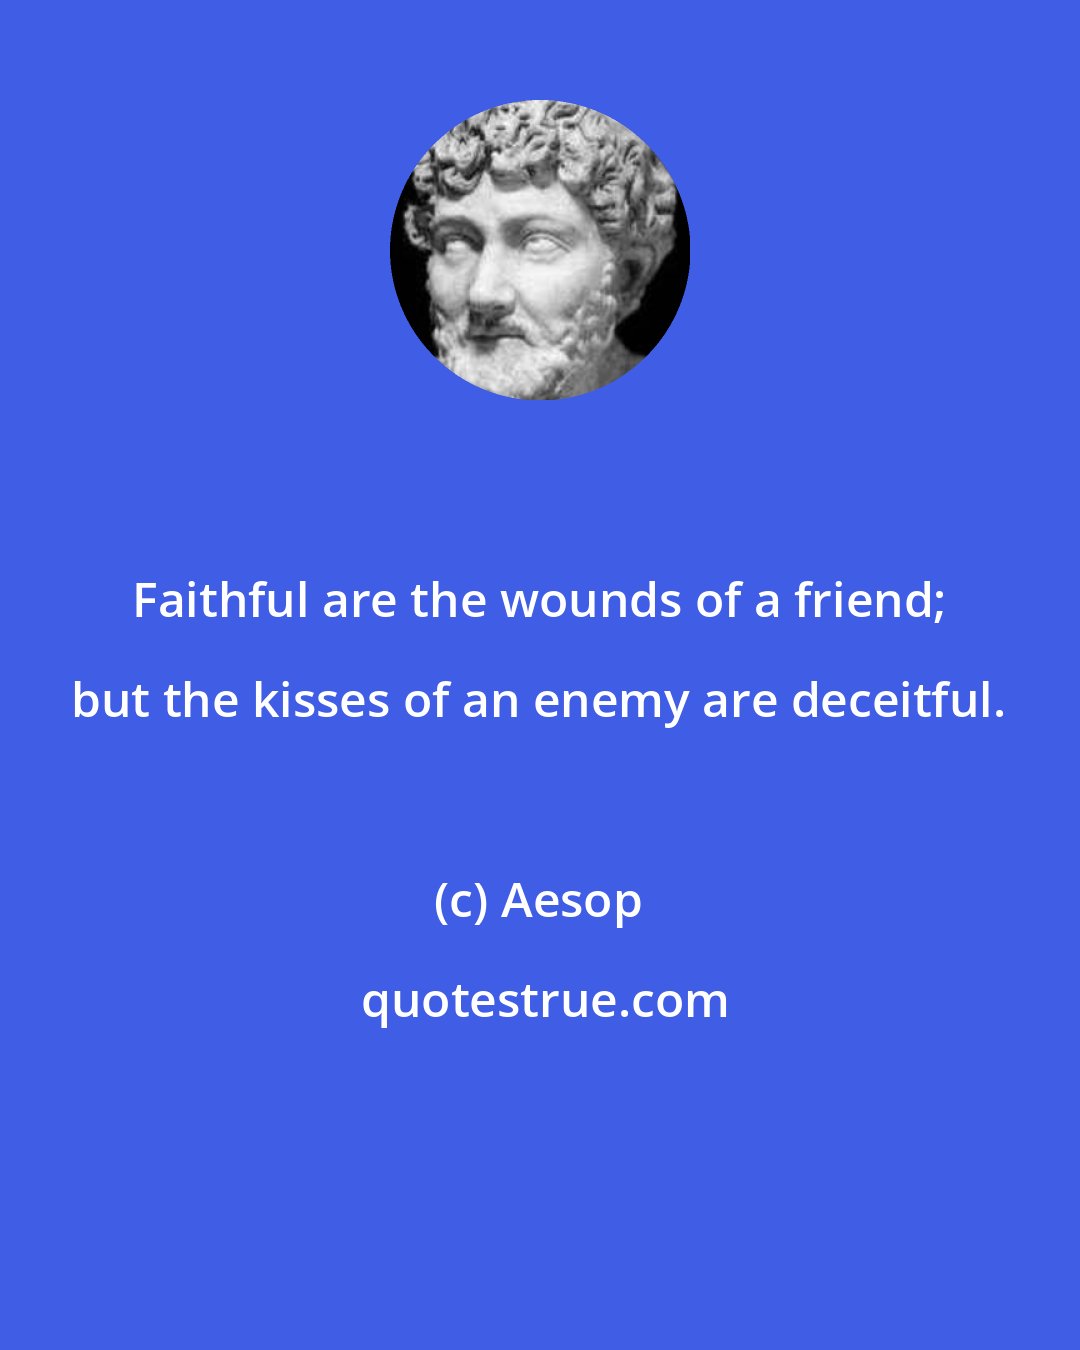 Aesop: Faithful are the wounds of a friend; but the kisses of an enemy are deceitful.